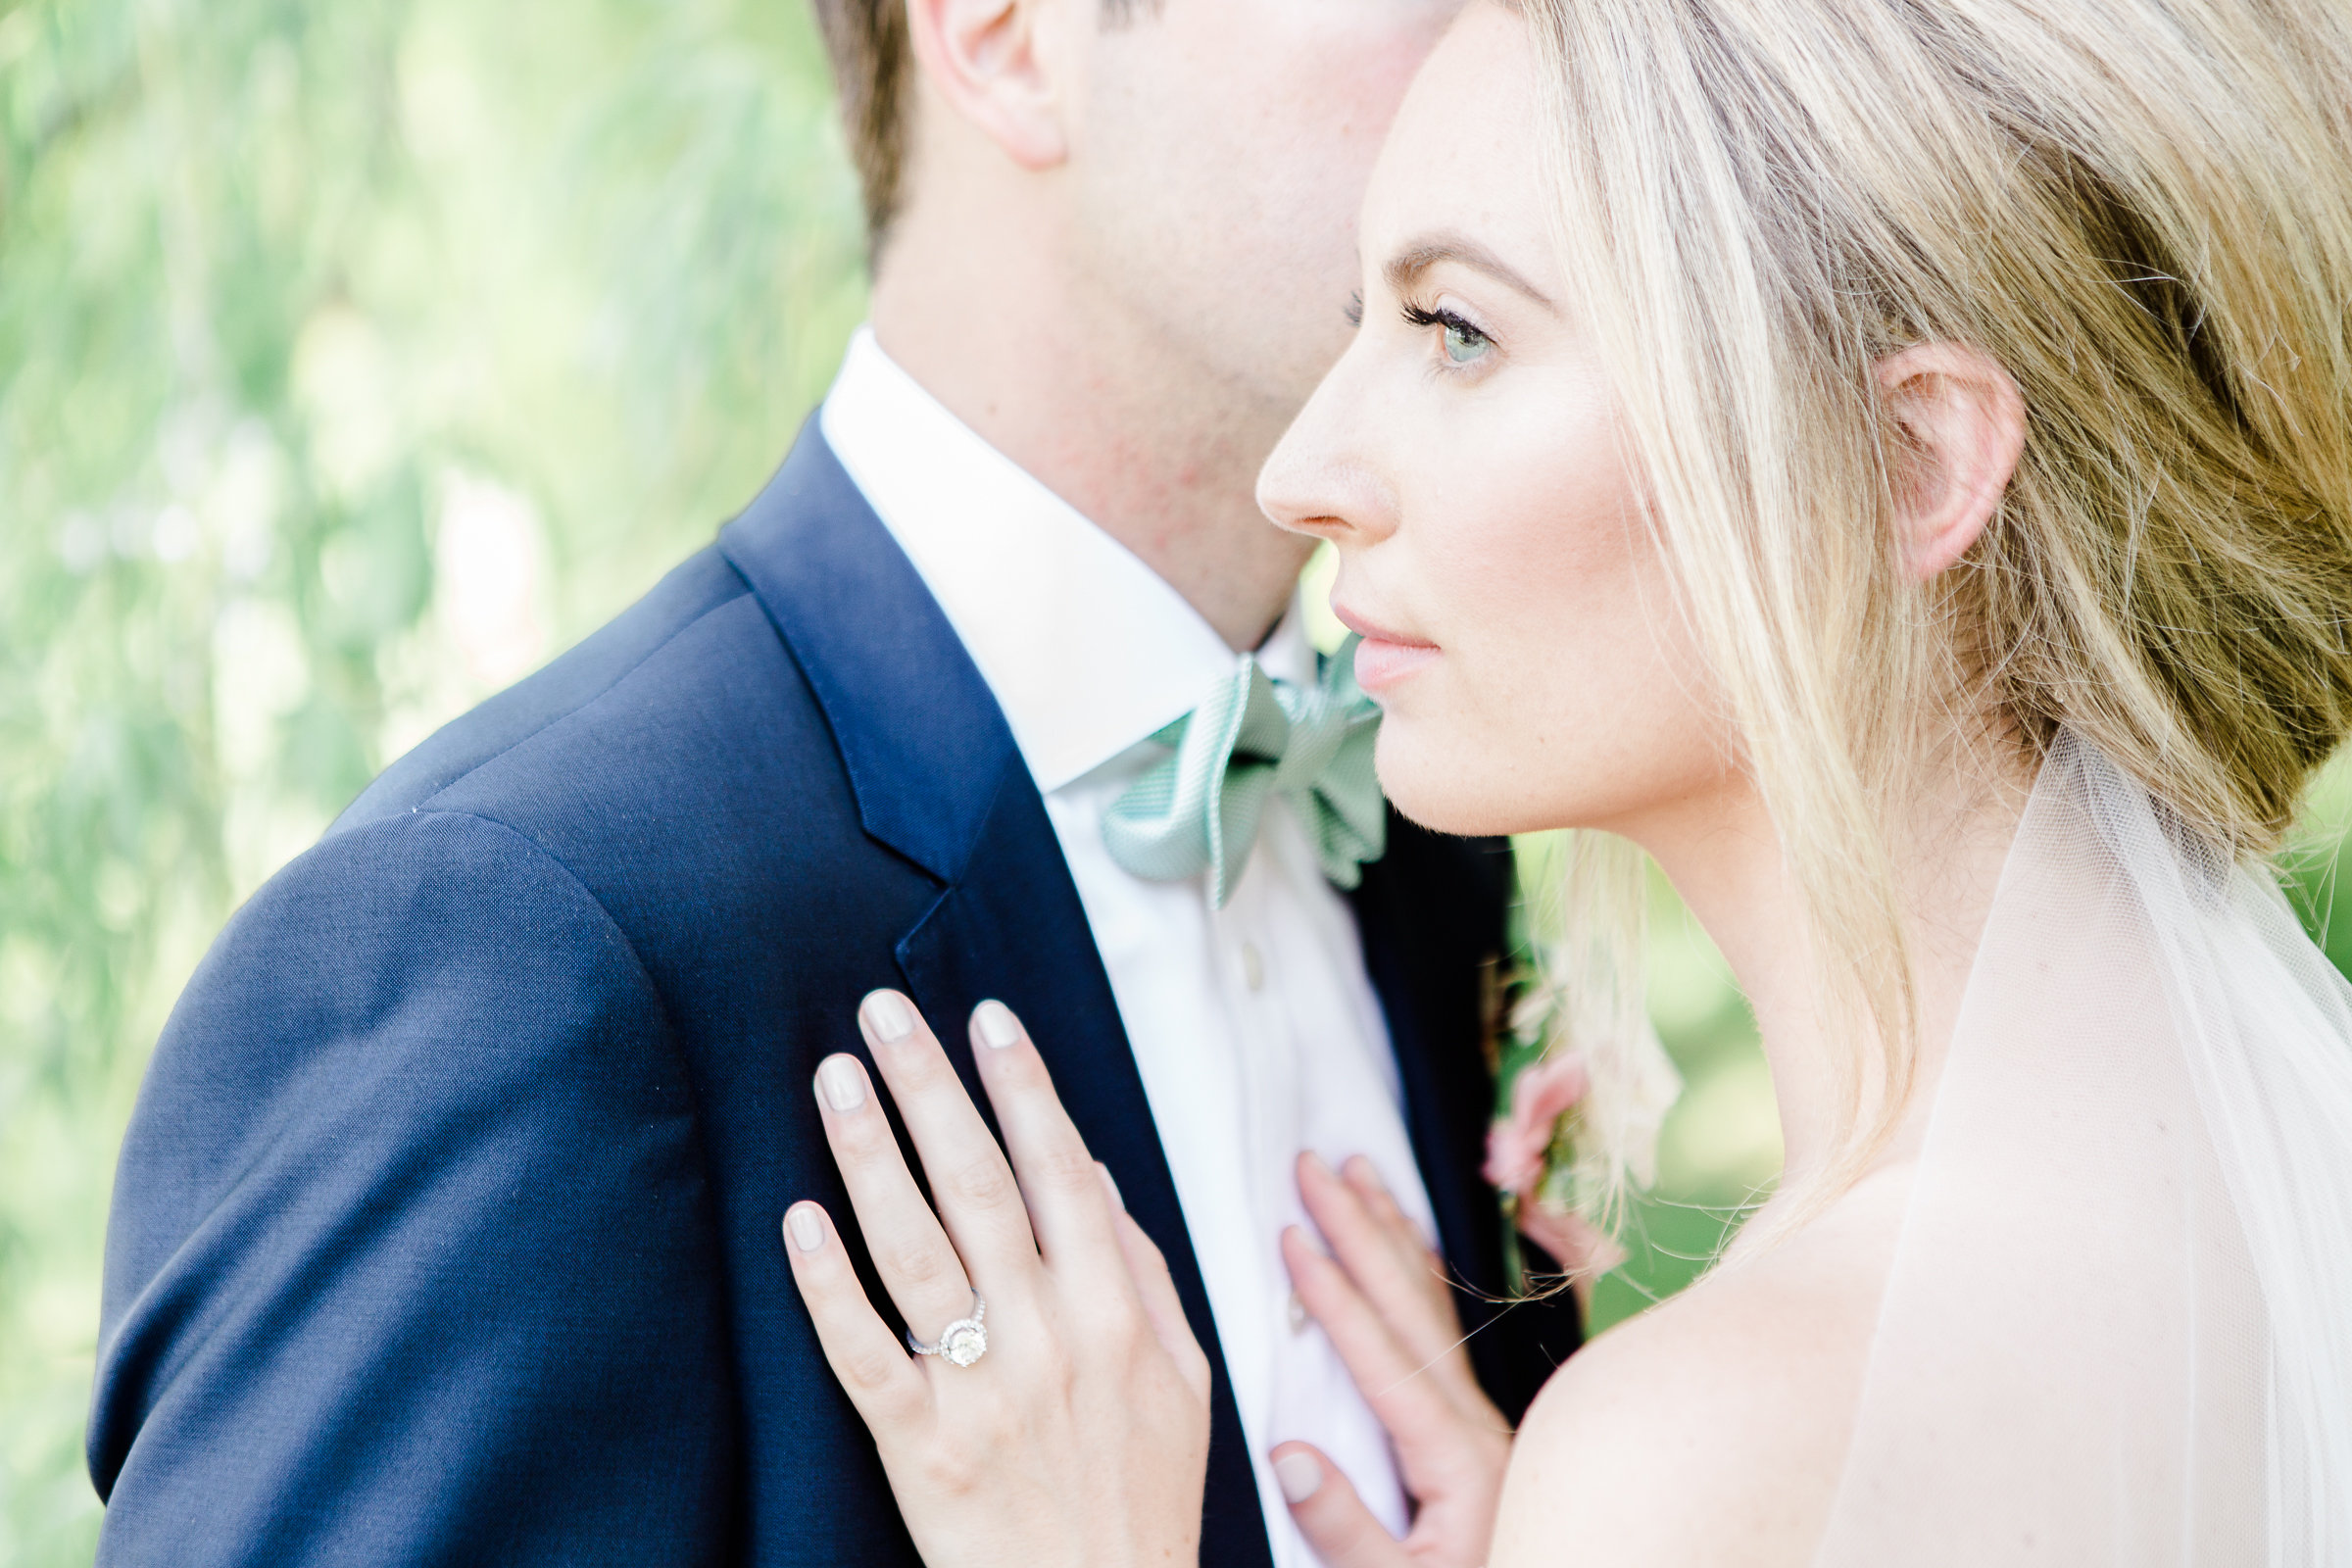 First Look | The Day's Design | Ashley Slater Photography